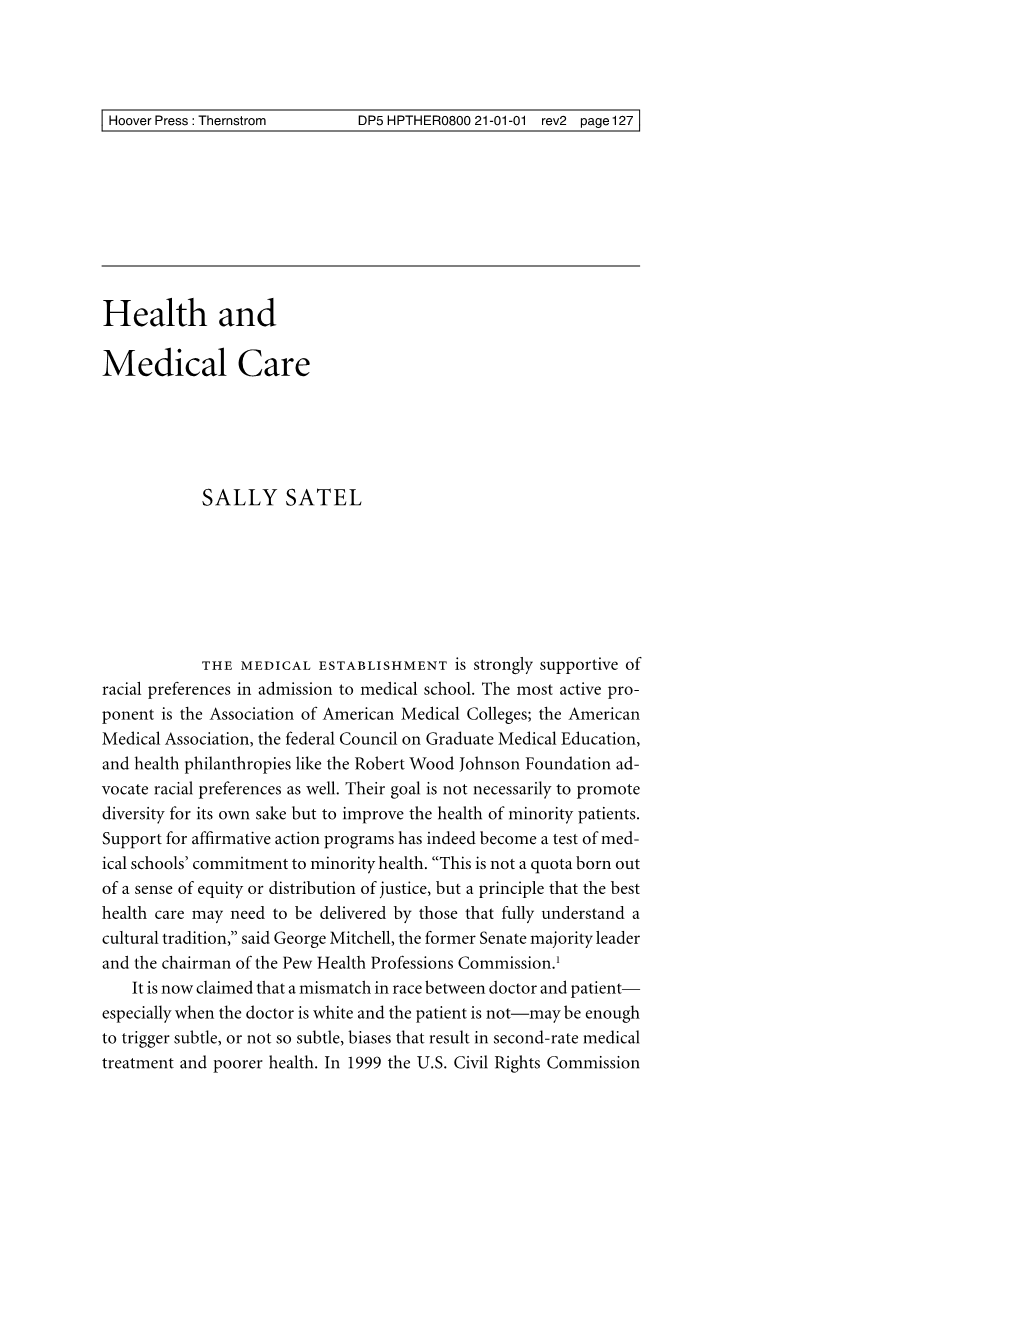 Health and Medical Care